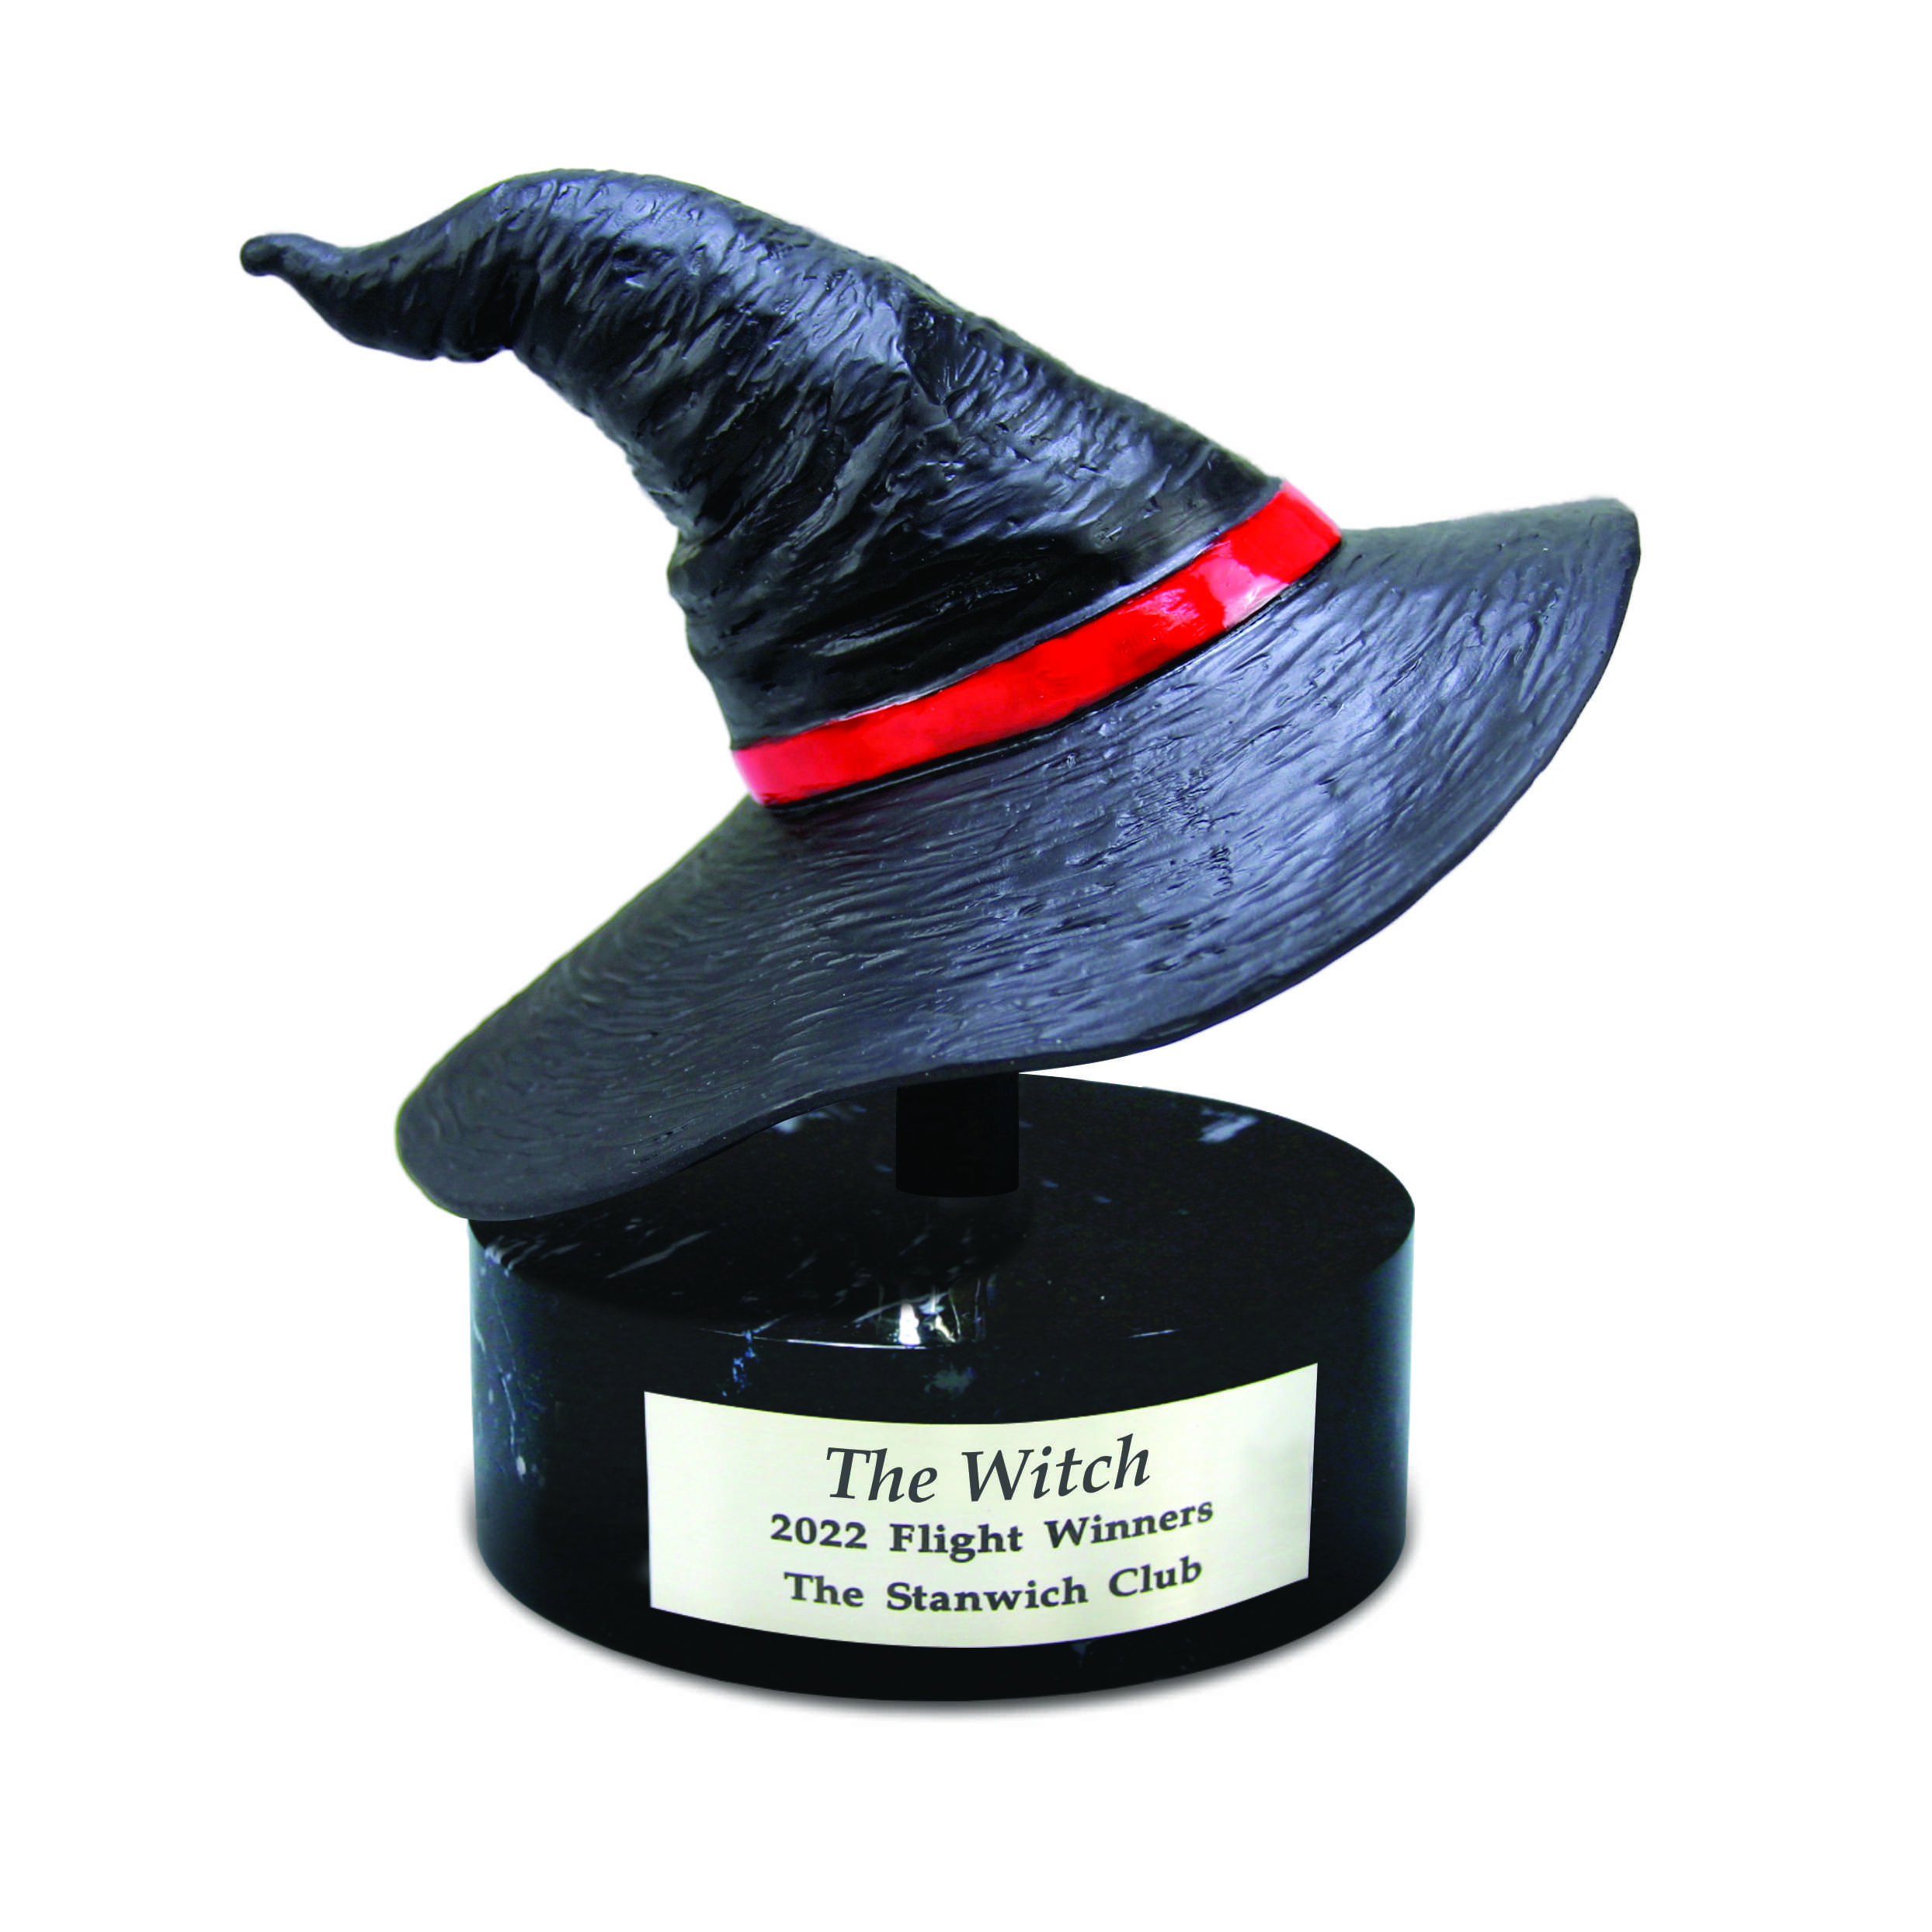 The Stanwich Club Witch's Hat trophy made by Malcolm DeMille